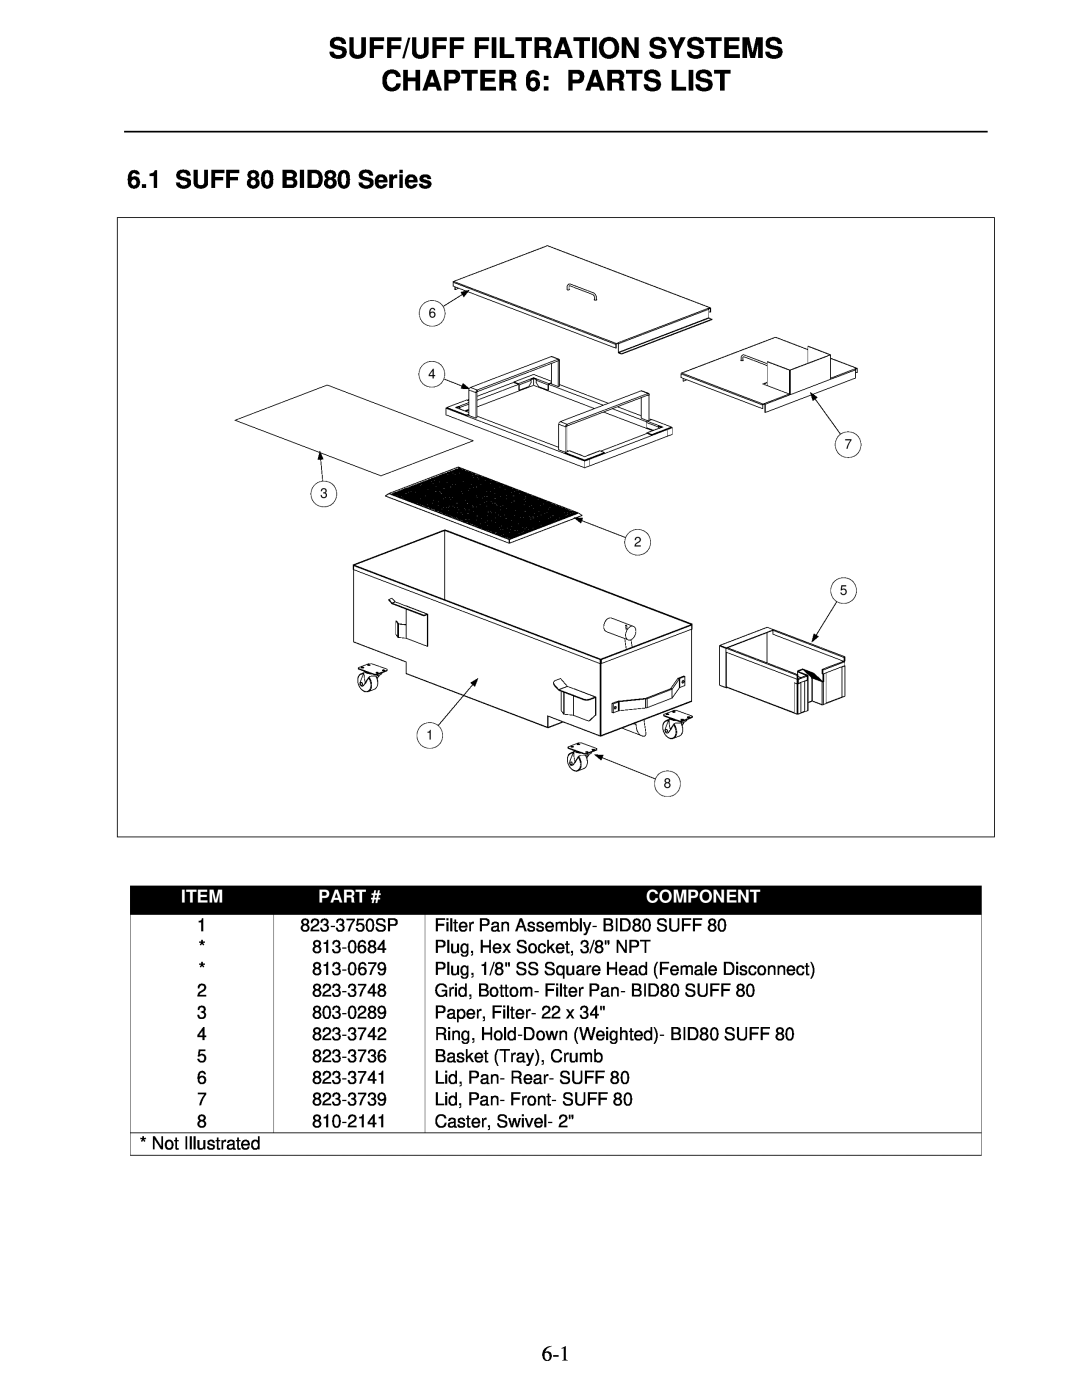 Frymaster 8195809 operation manual Suff/Uff Filtration Systems Parts List, SUFF 80 BID80 Series, Part #, Component 